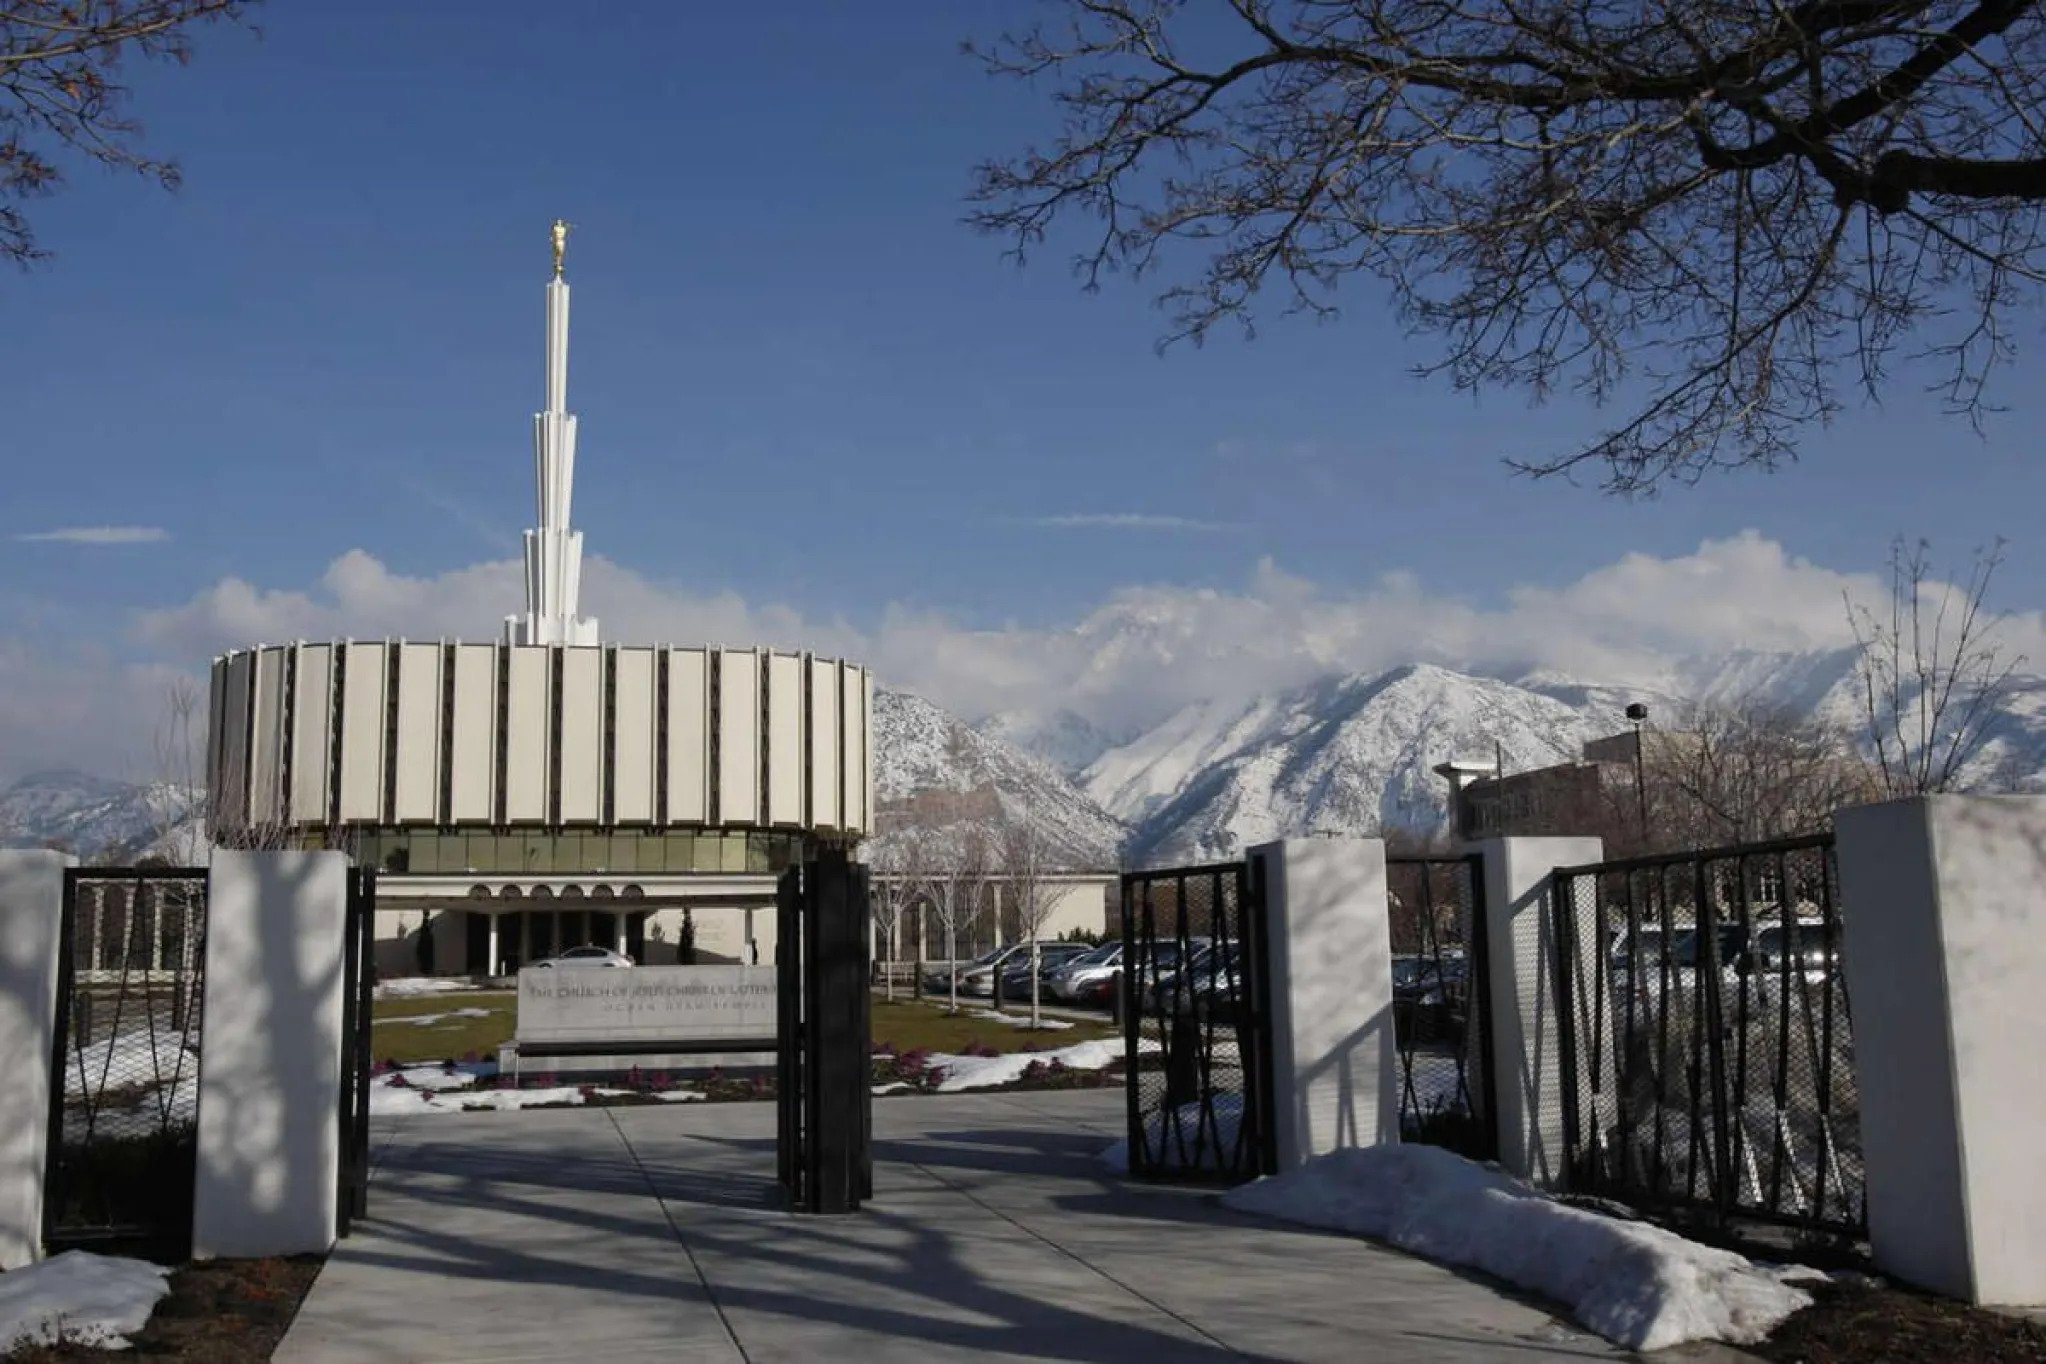 An open gate with the original Ogden Utah Temple, dedicated in 1972 — that had a flat, round base with a spire in the center — in the background.